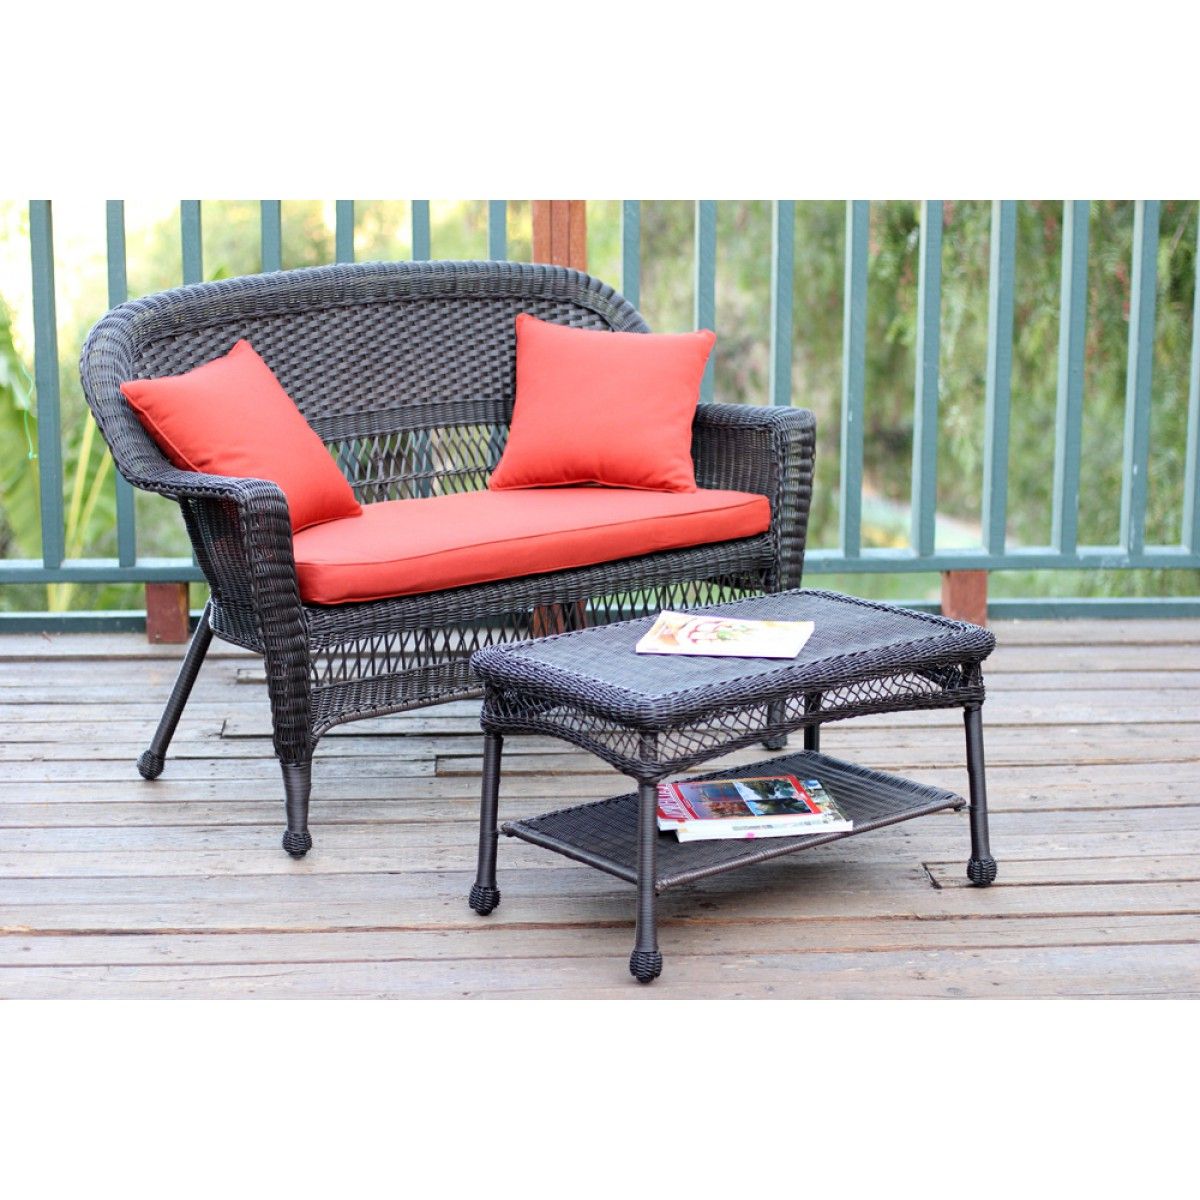 Most Up To Date Black And Tan Rattan Coffee Tables Intended For Espresso Wicker Patio Love Seat And Coffee Table Set With (View 4 of 20)